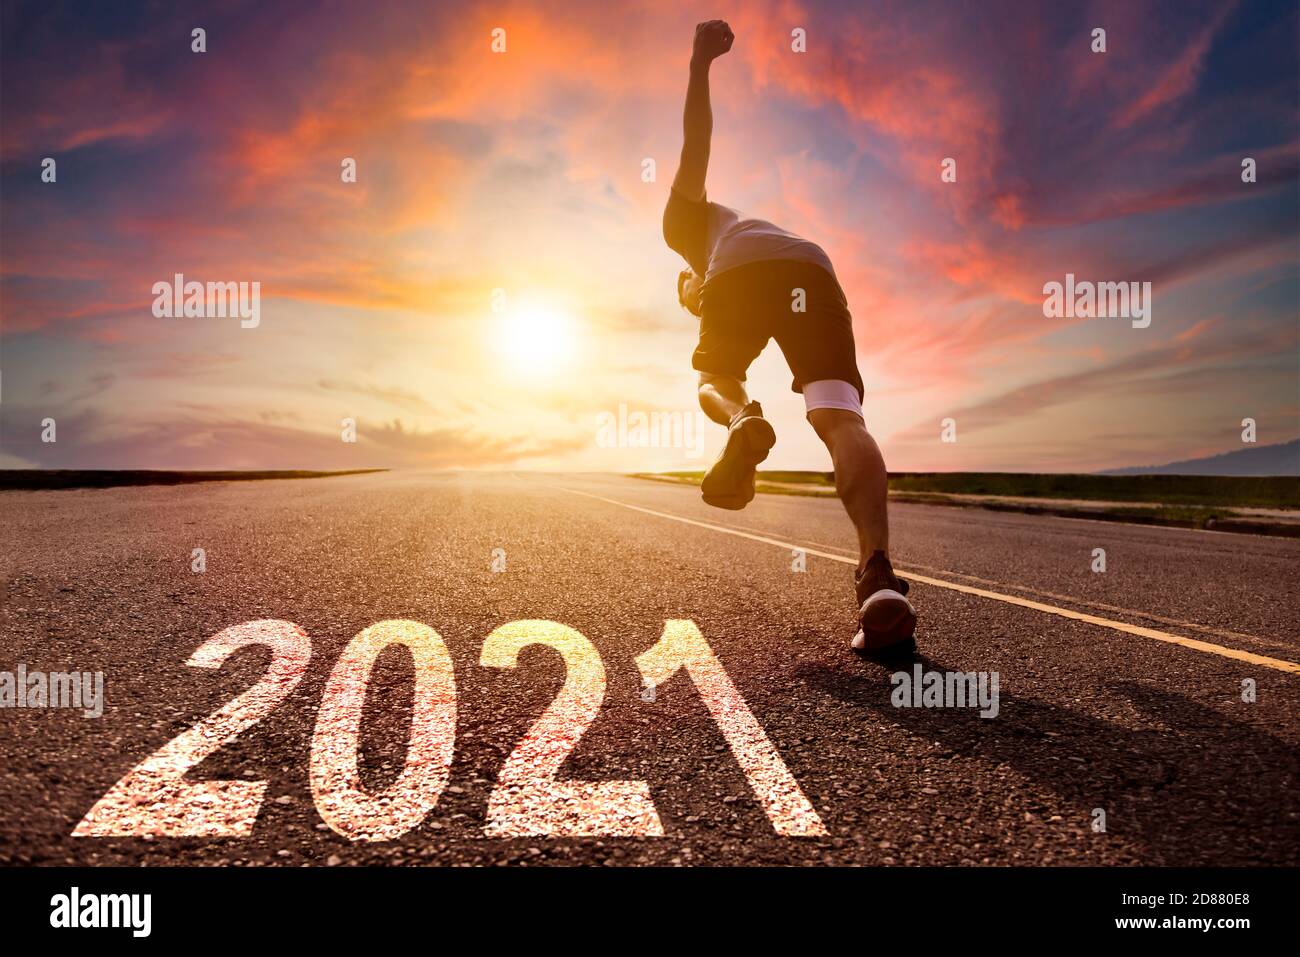 man running and sprinting on road with 2021 new year concept Stock Photo